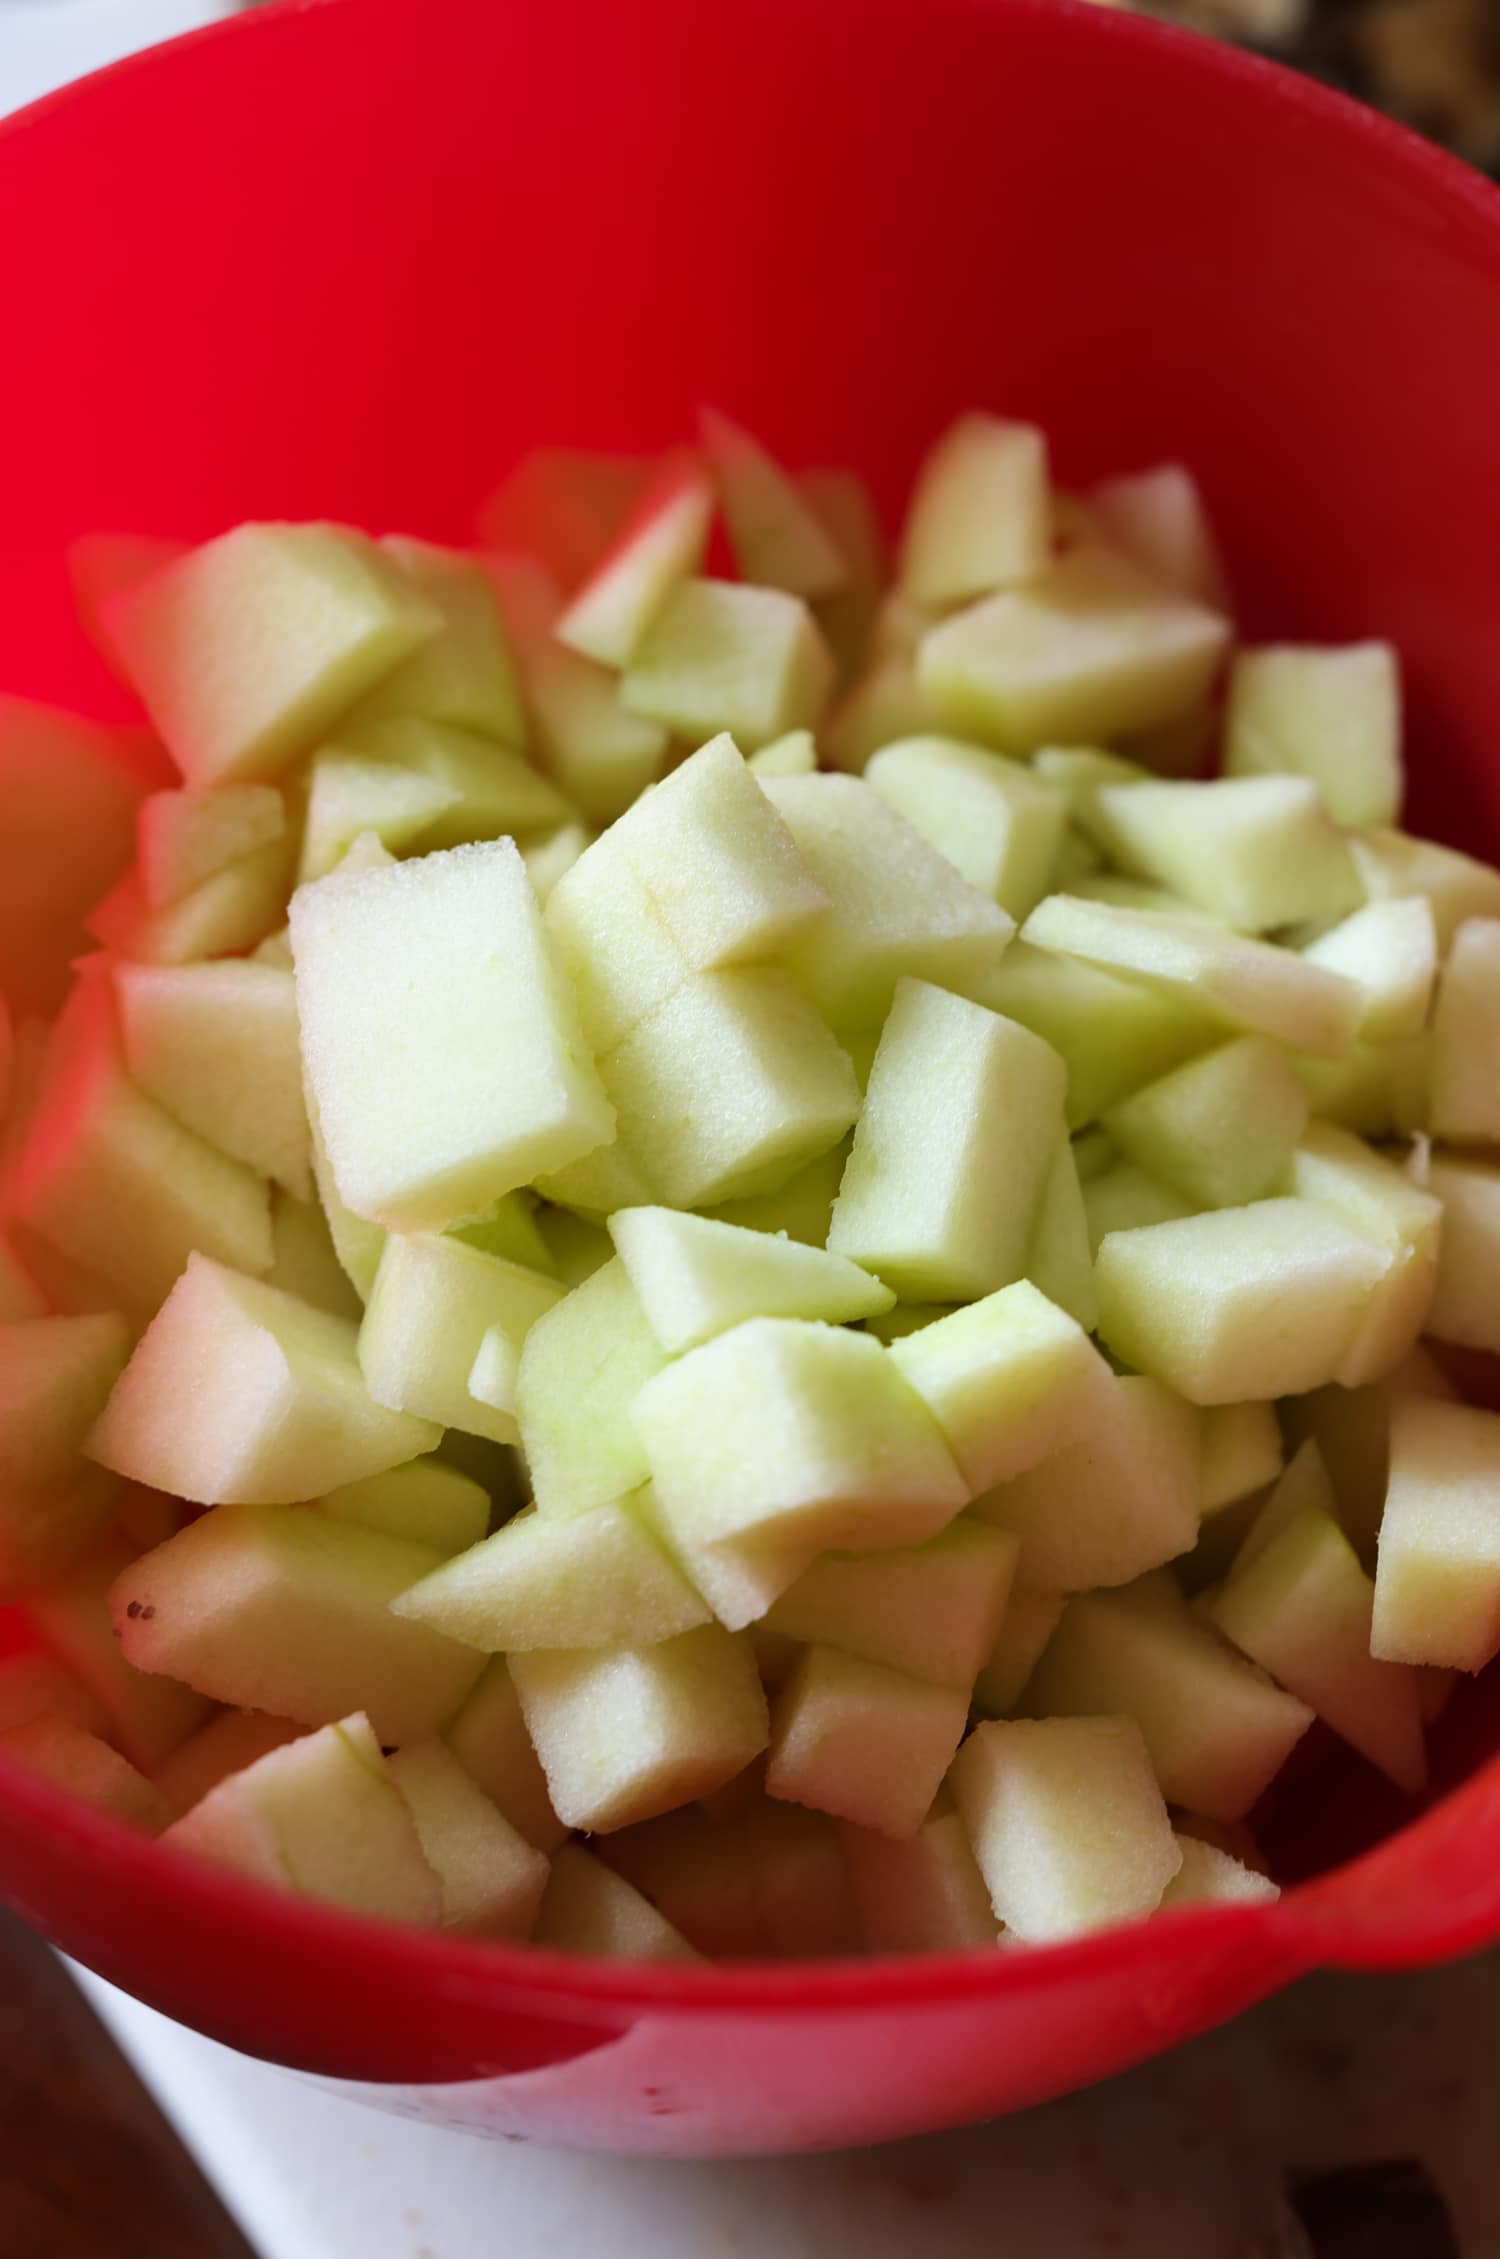 chopped granny smith apples in a red bowl